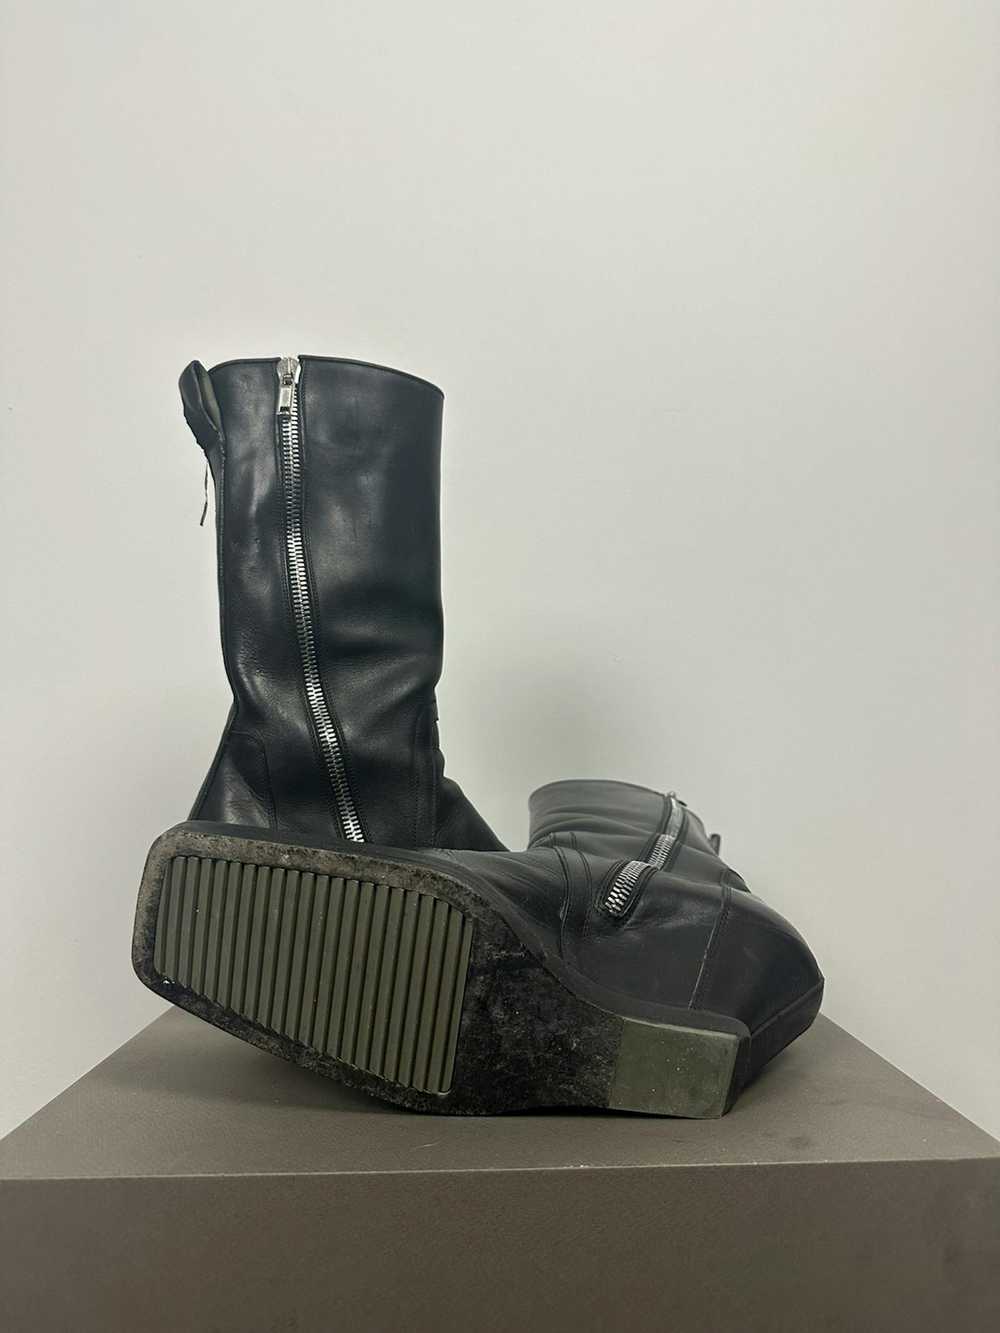 Rick Owens SS19 ‘BABEL’ Square Toe Wedge Boots - image 7